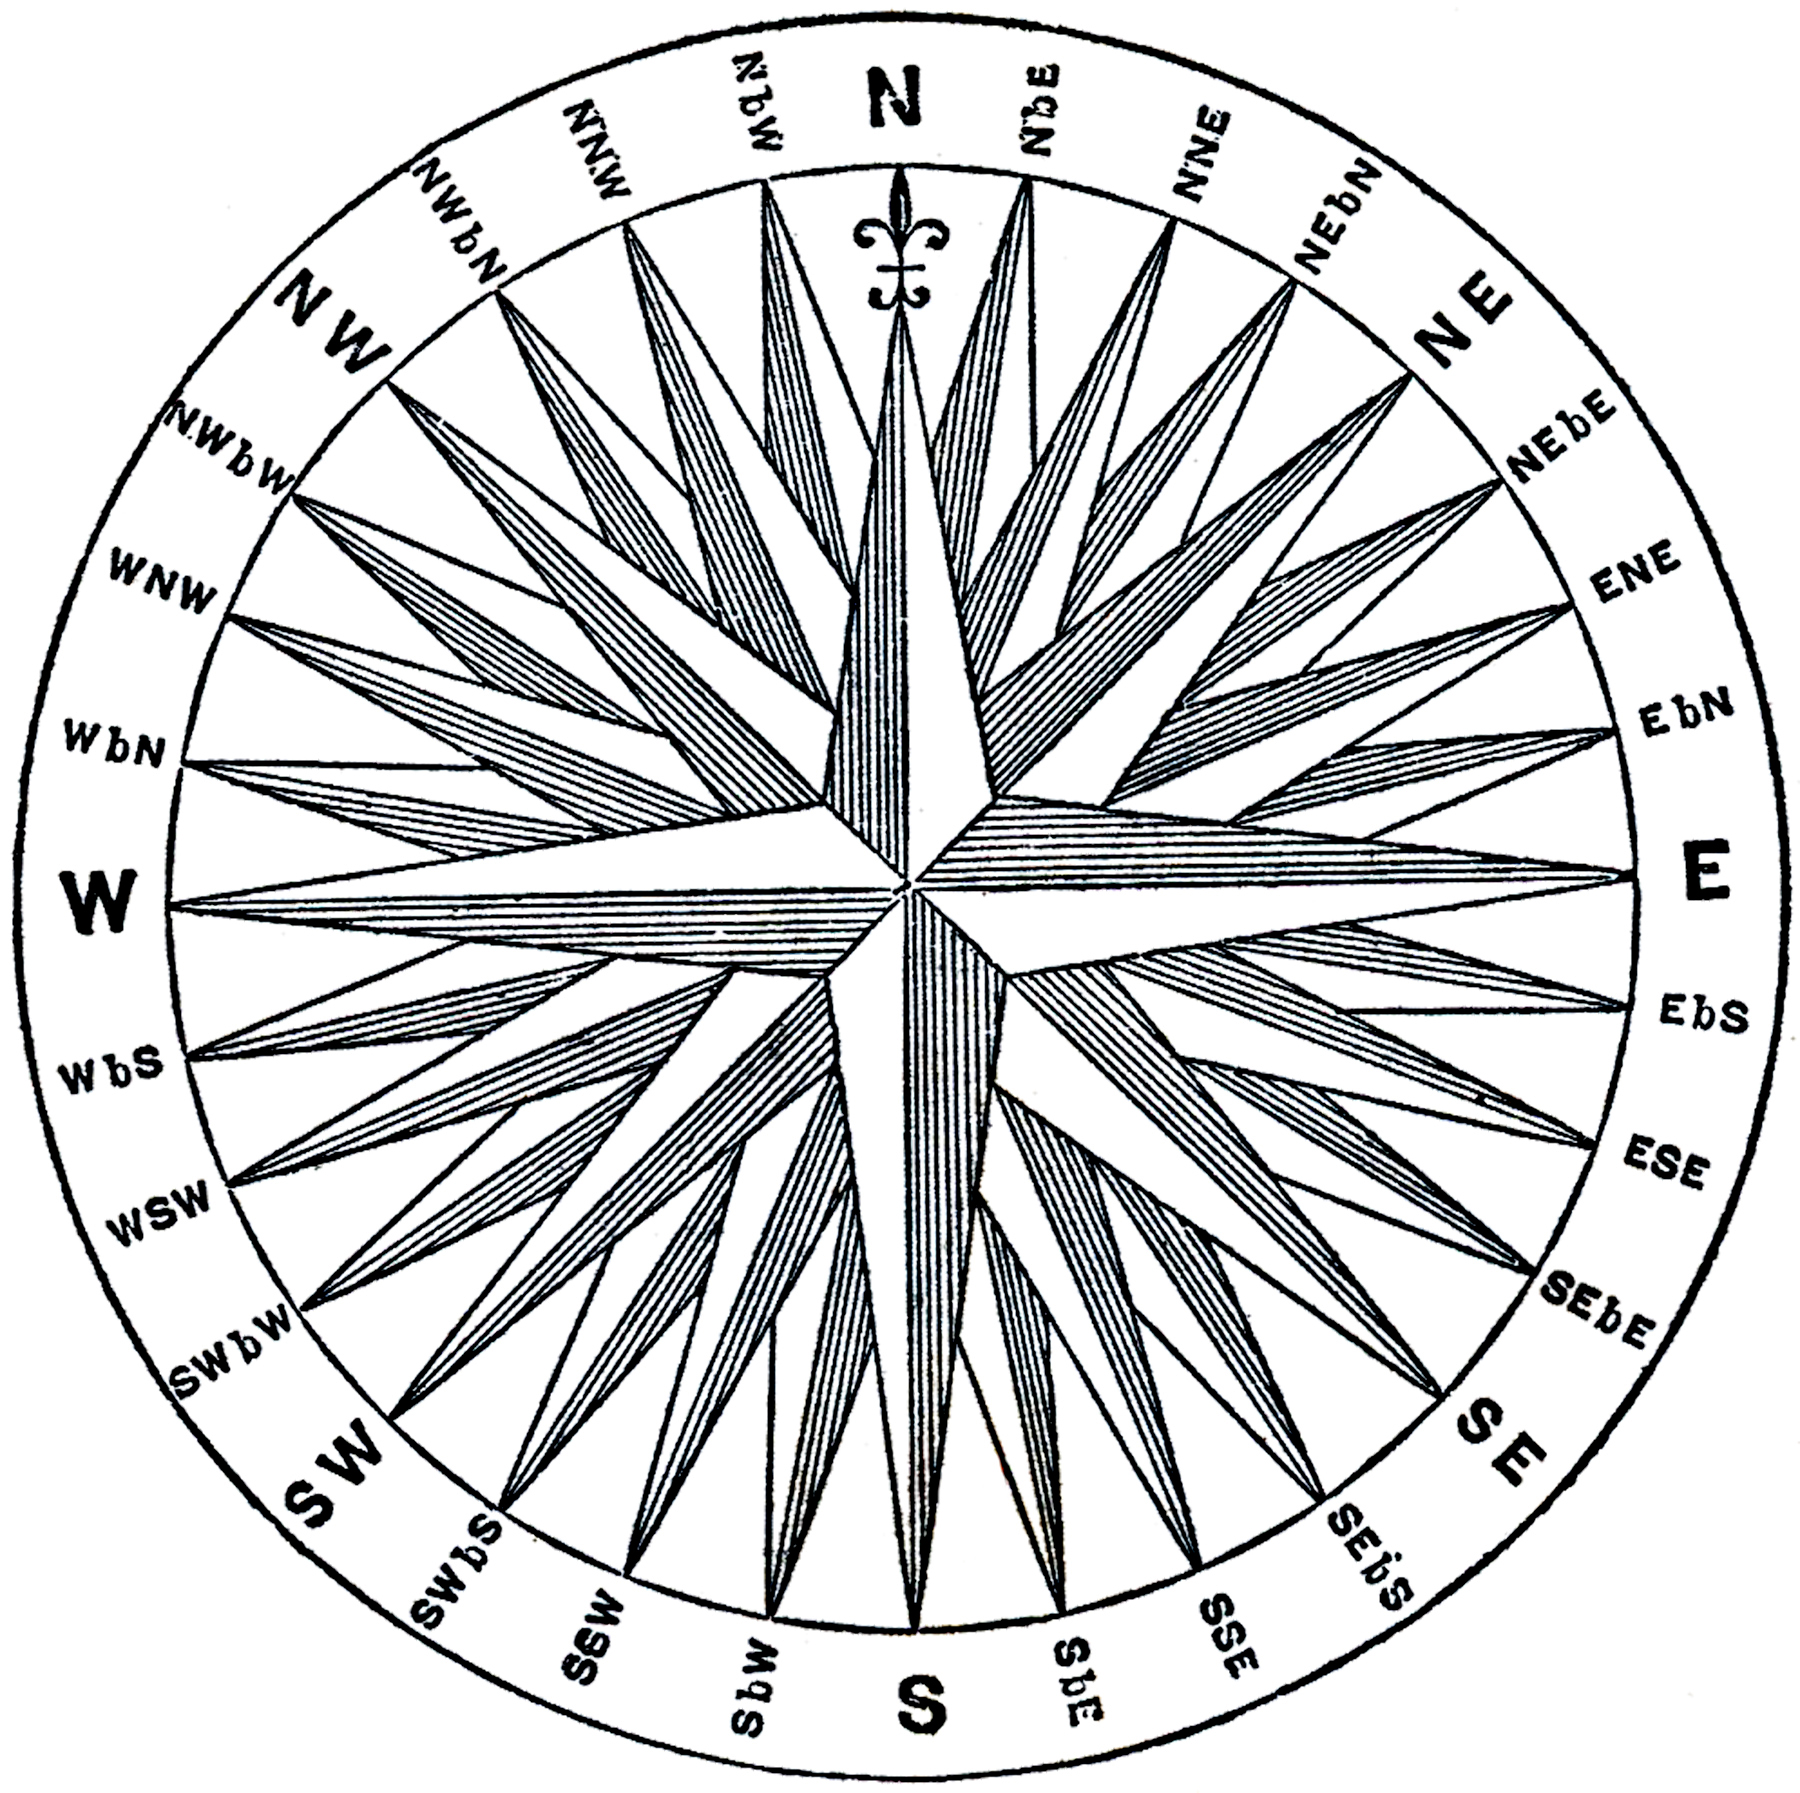 Vintage Compass Rose Image - The Graphics Fairy